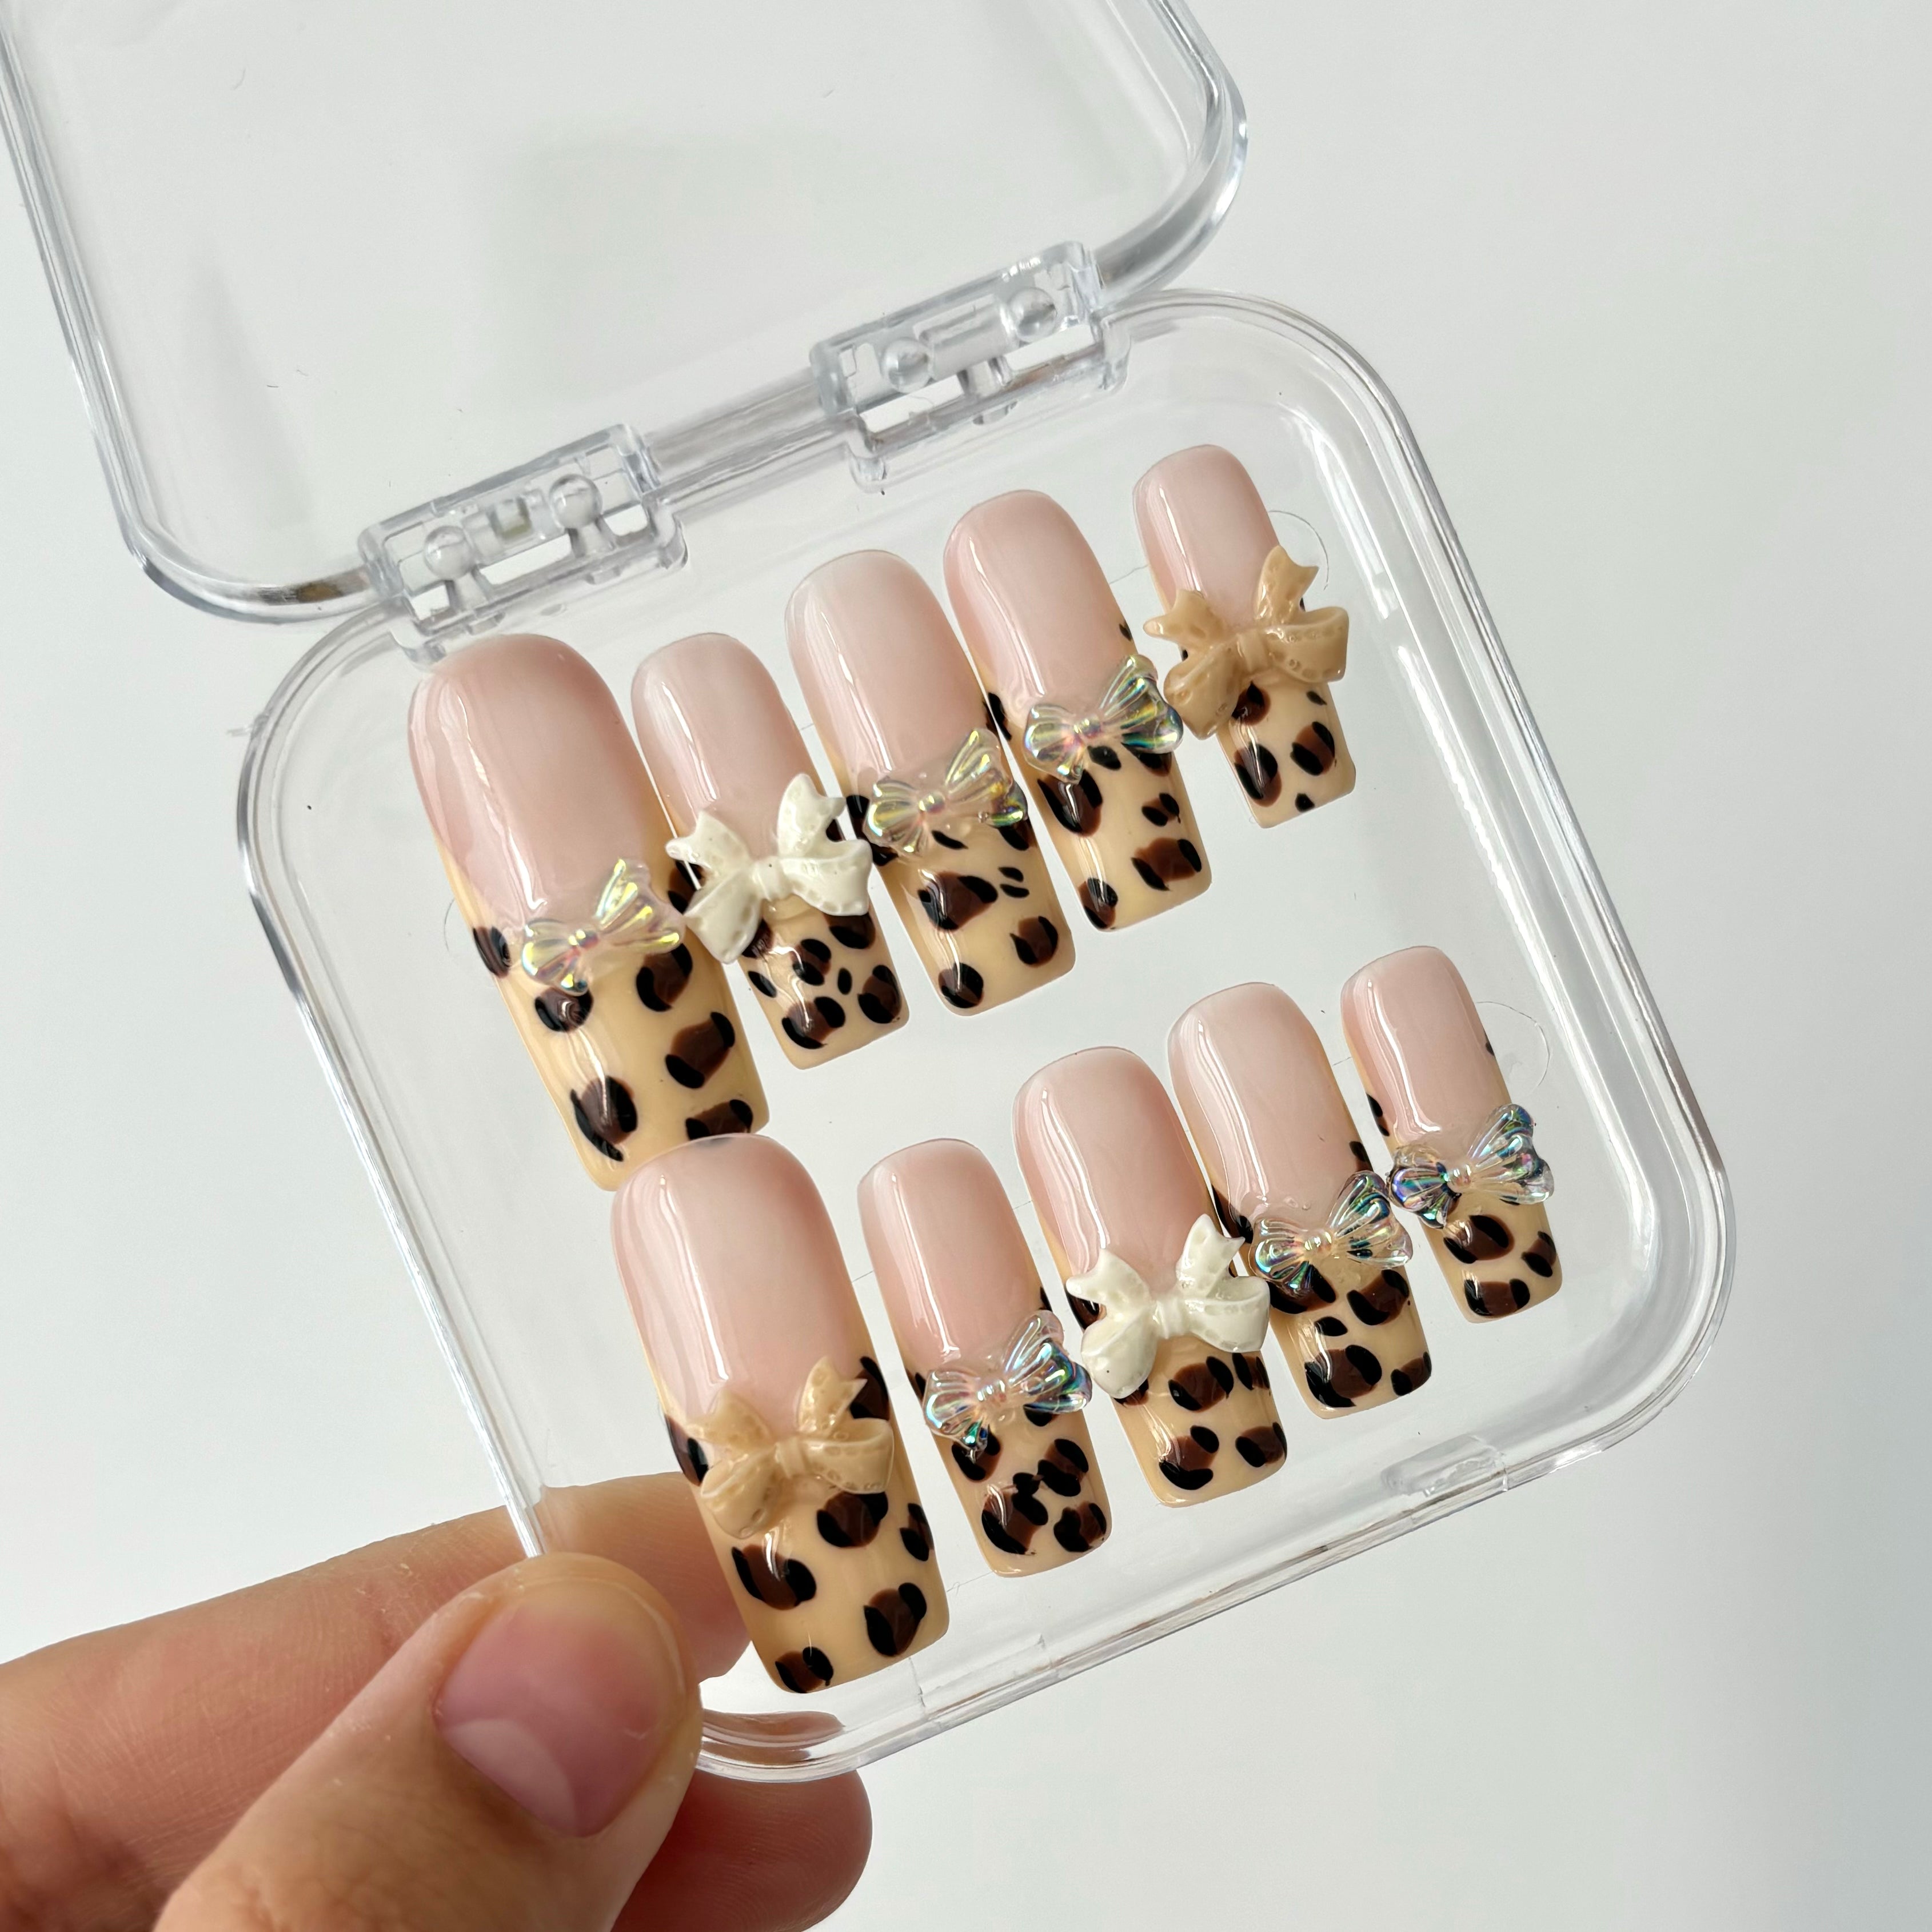 LEOPARD PRINT -TEN PIECES OF HANDCRAFTED PRESS ON NAIL